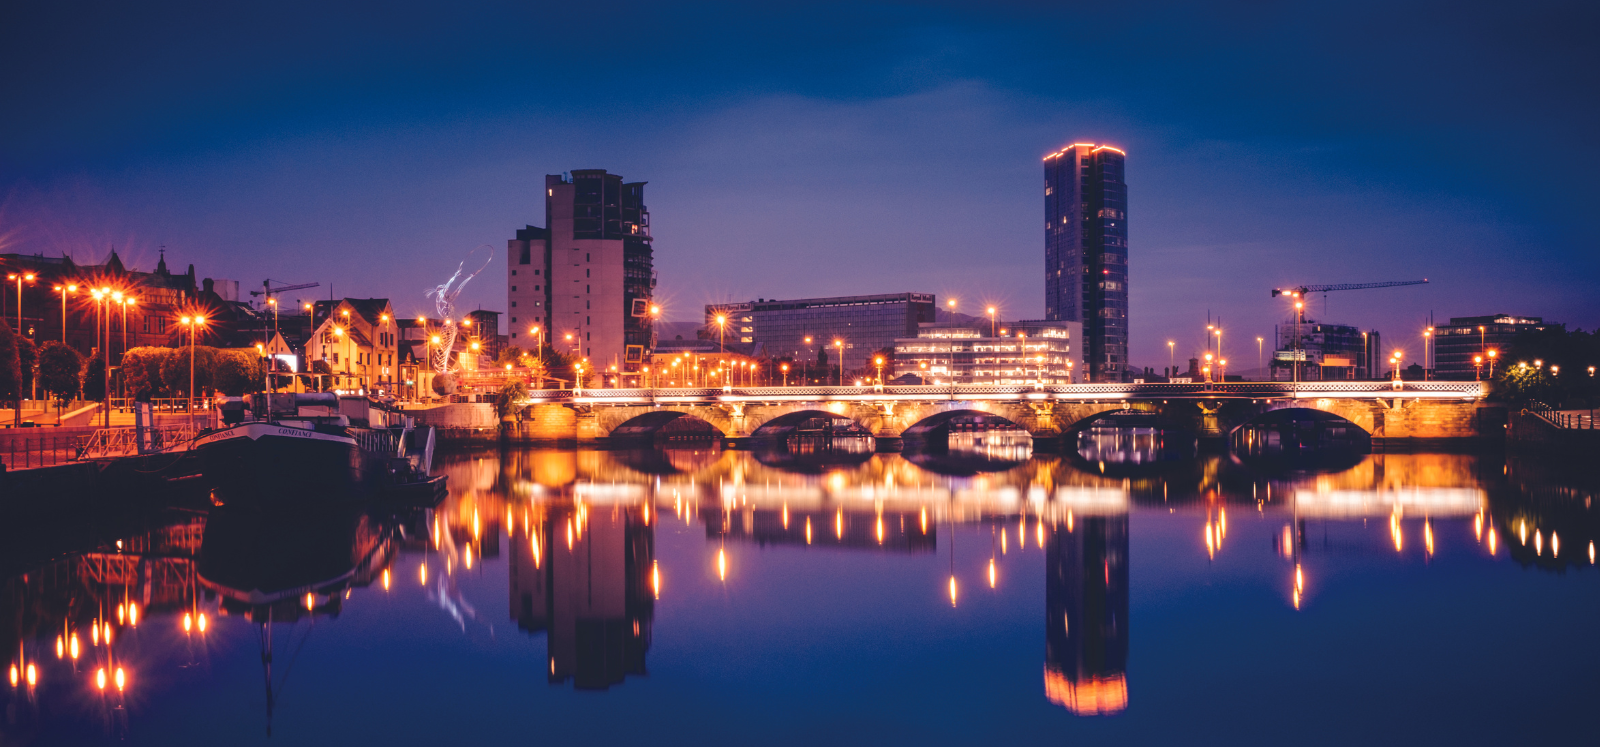 Image shows the river lagan lit up at night time, taken from City Quays